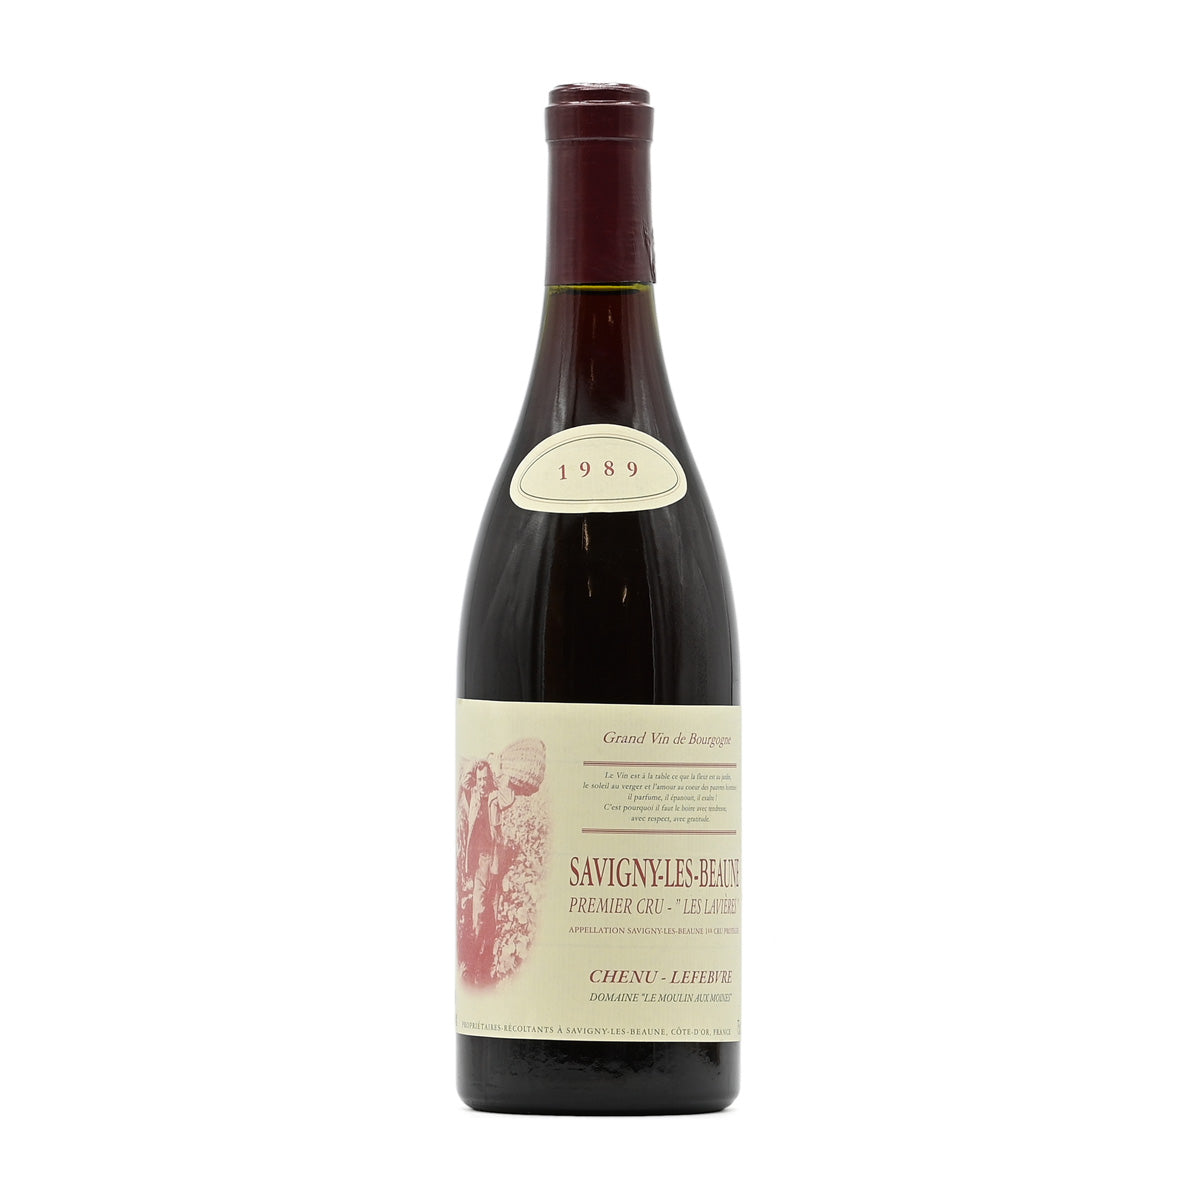 Moulin Aux Moines (Hubert Chenu Lefebvre) Savigny les Beaune Premier Cru les Lavieres 1989, 750ml French red wine, made from Pinot Noir, from Savigny-les-Beaune, Burgundy, France – GDV Fine Wines, Hong Kong